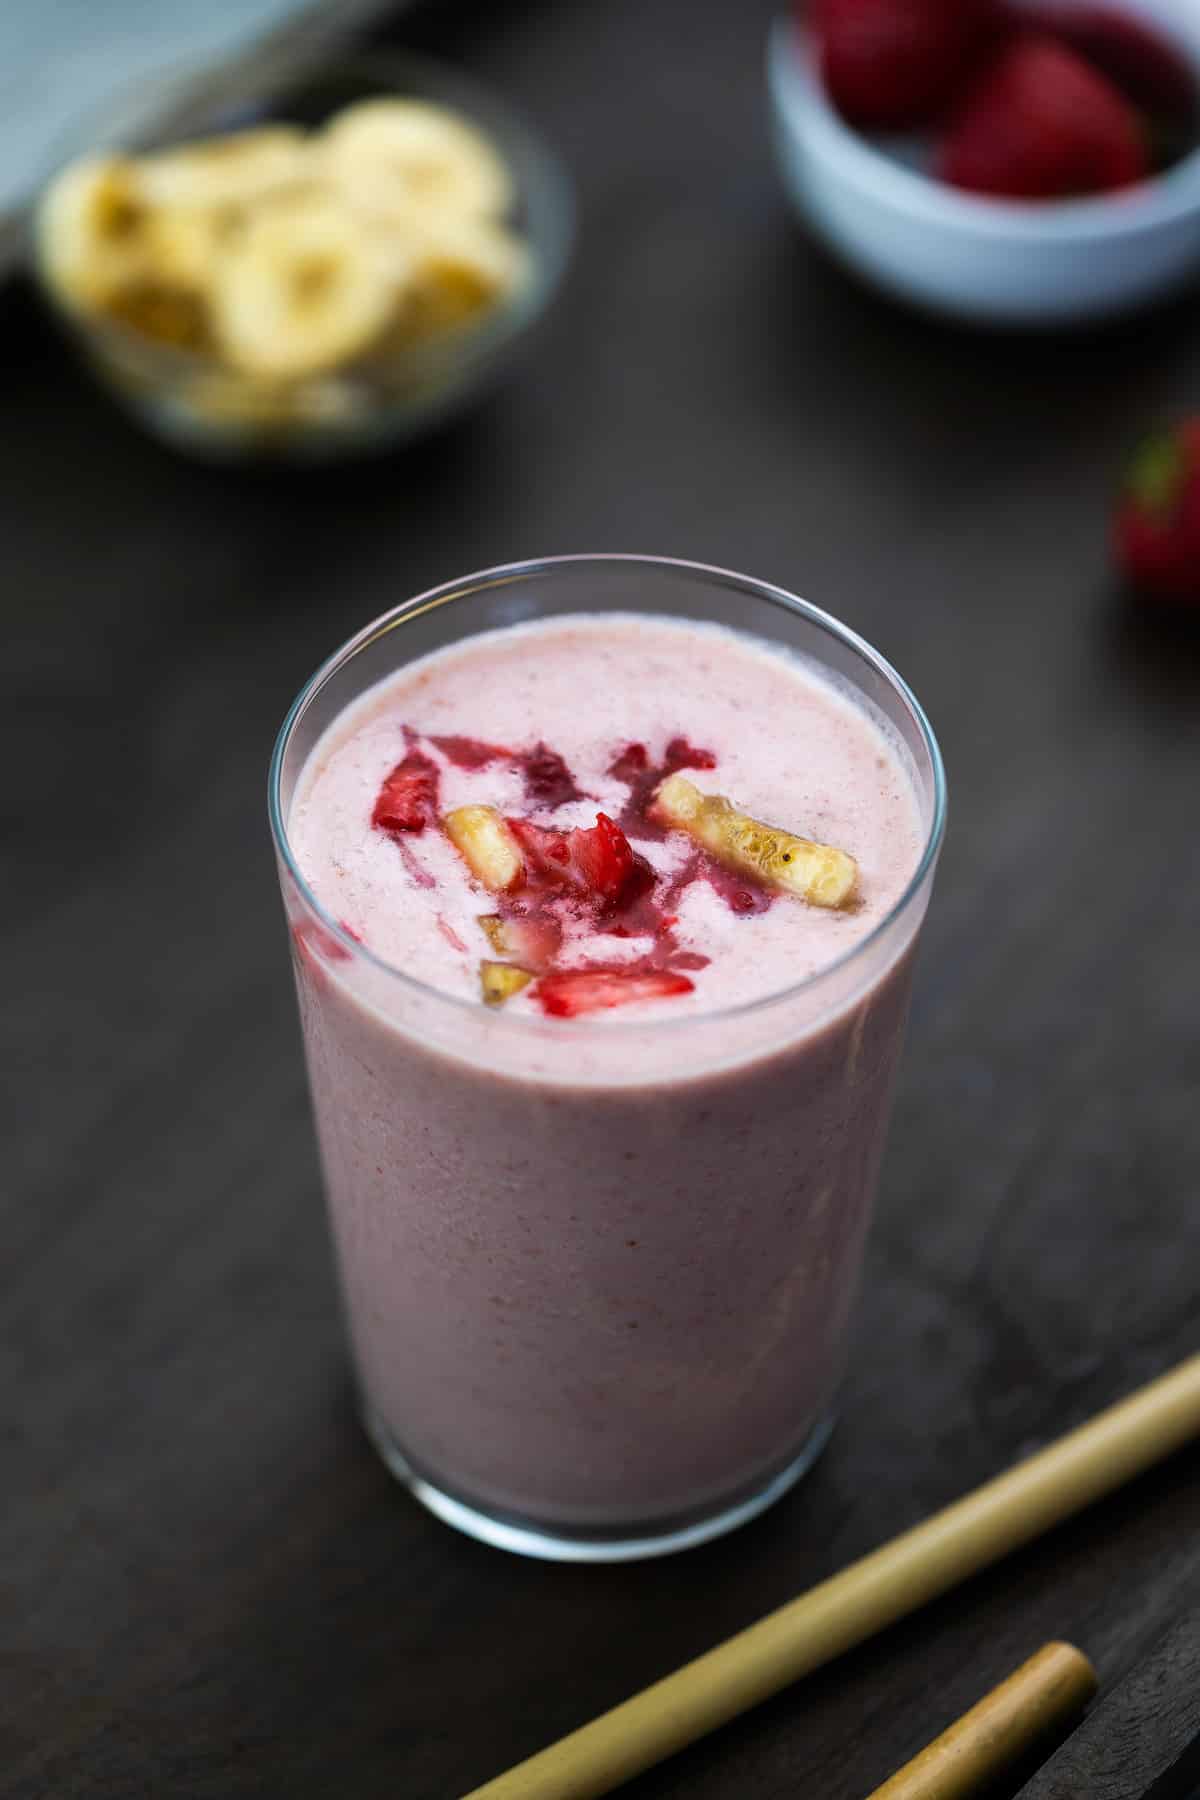 Strawberry Banana Smoothie is served in a glass with strawberries and banana nearby.